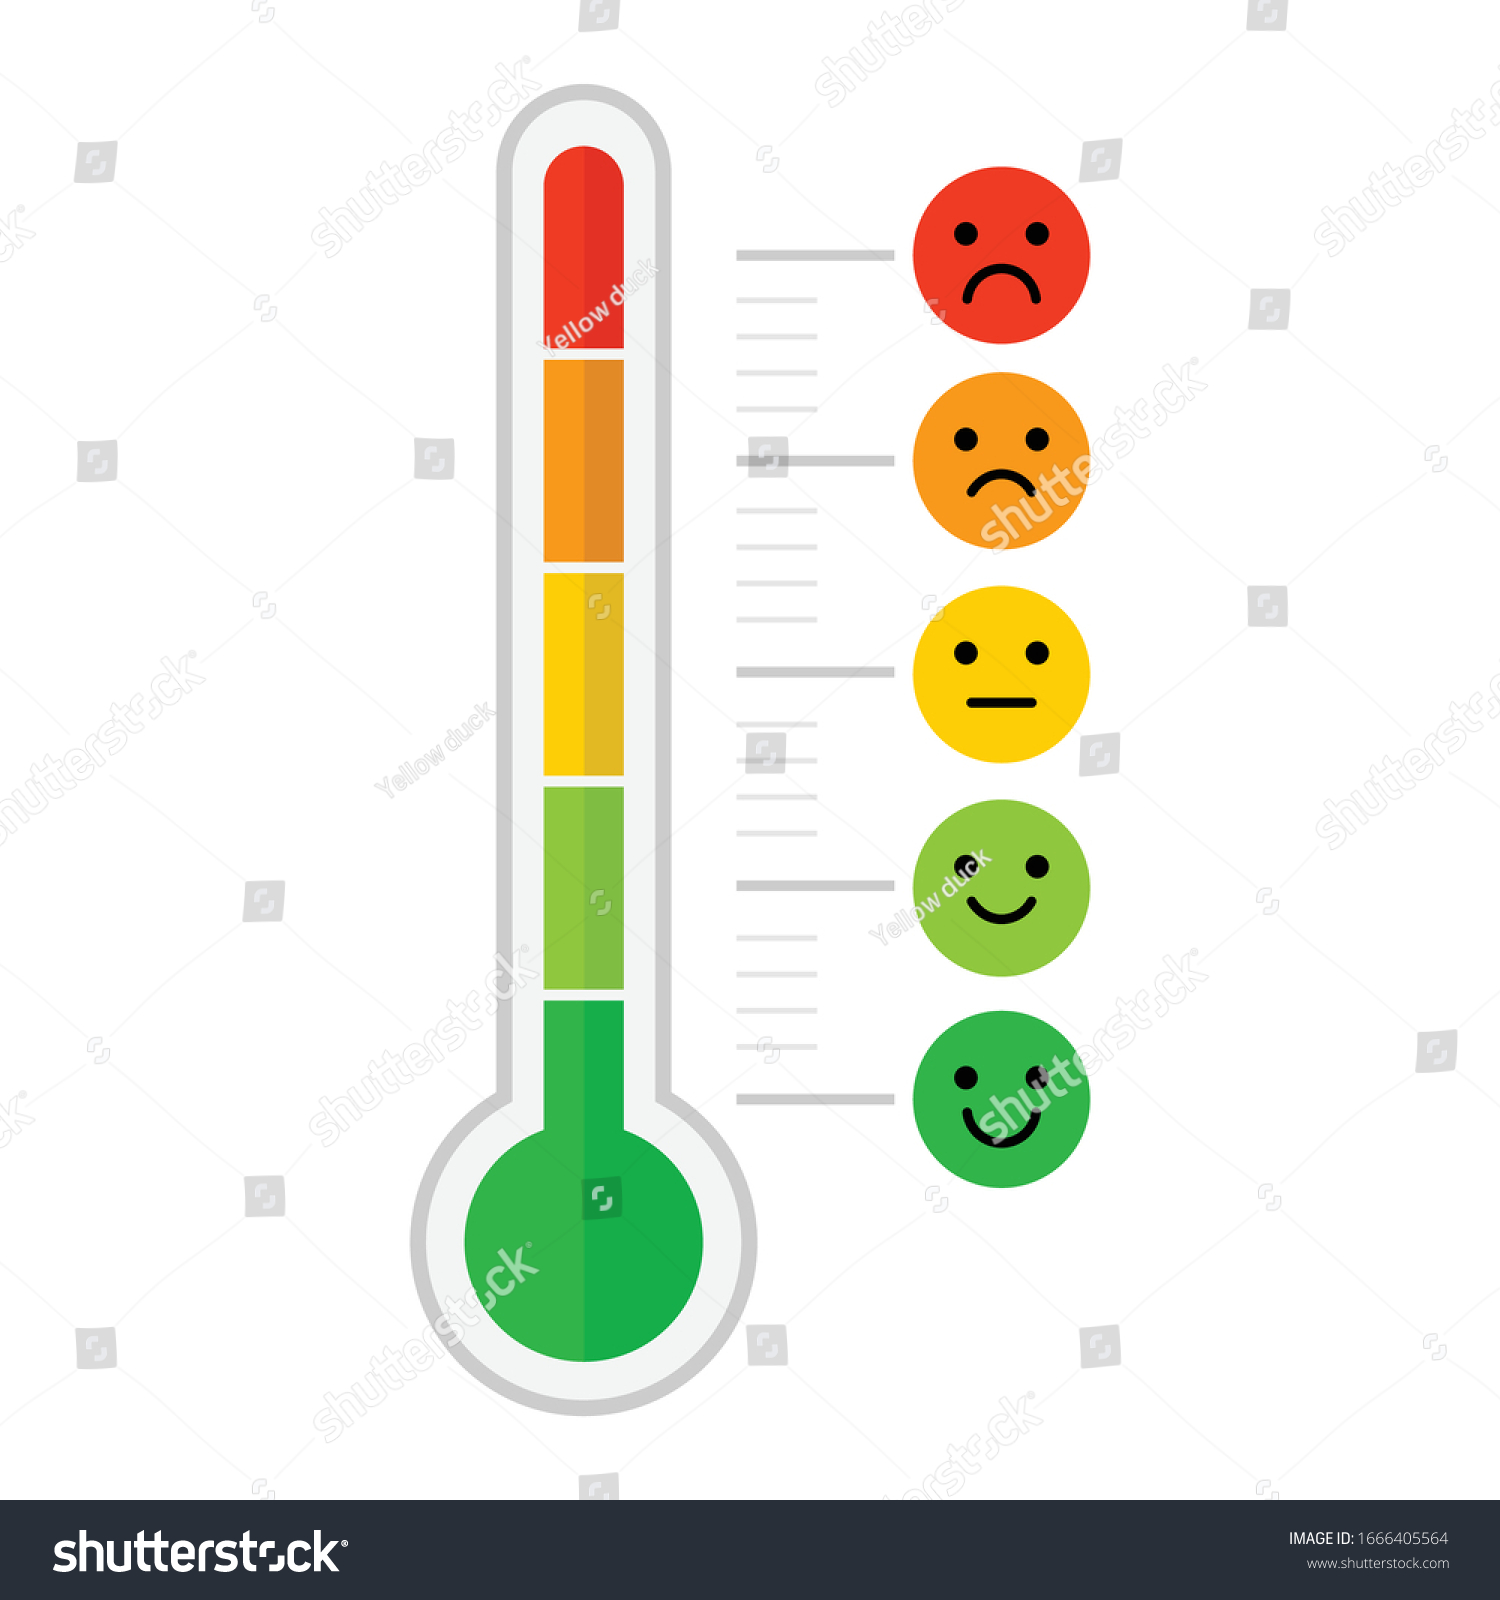 thermometer emotional scale difference icon. face emotion happy normal and angry. vector illustration flat design. isolated on white background. Temperature and weather forecast. #1666405564